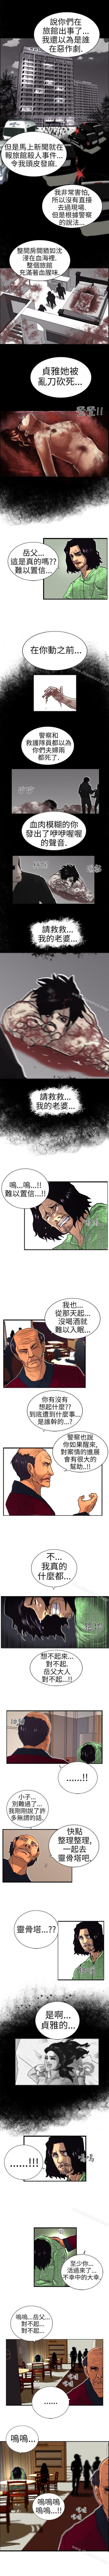 Titten 覺醒 1-34 Cowgirl - Page 8